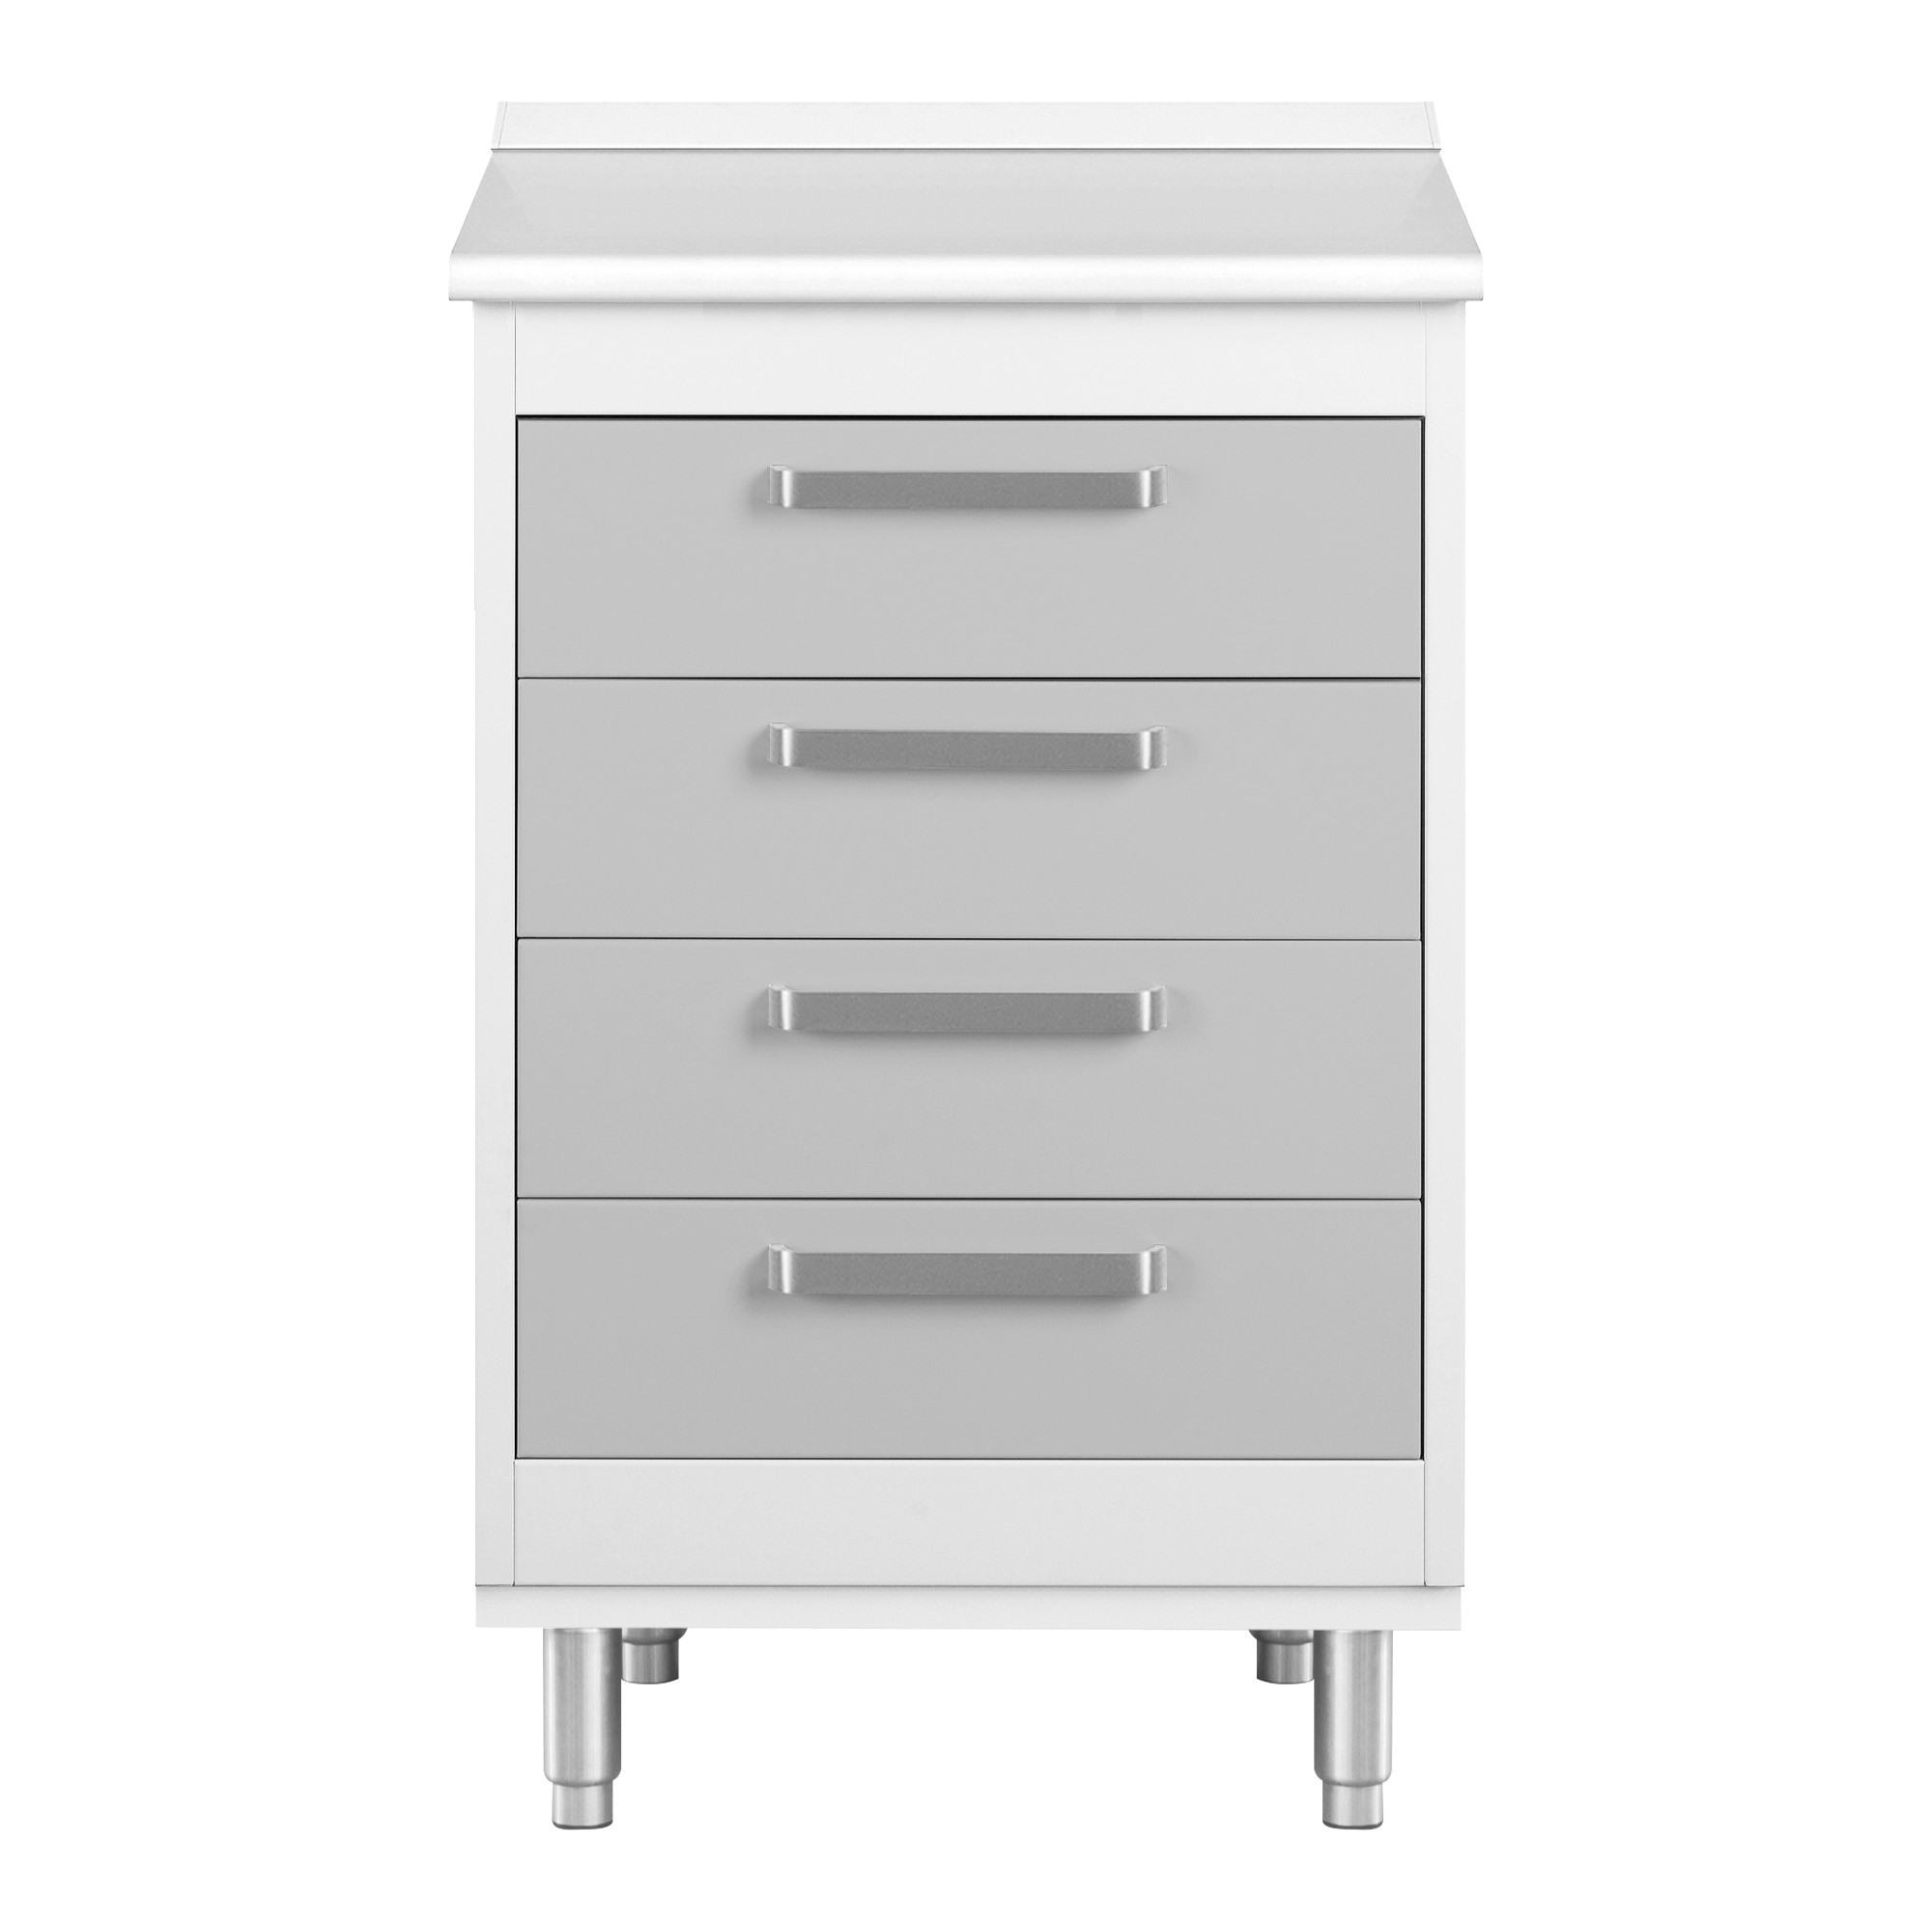 Module with 4 drawers and feet